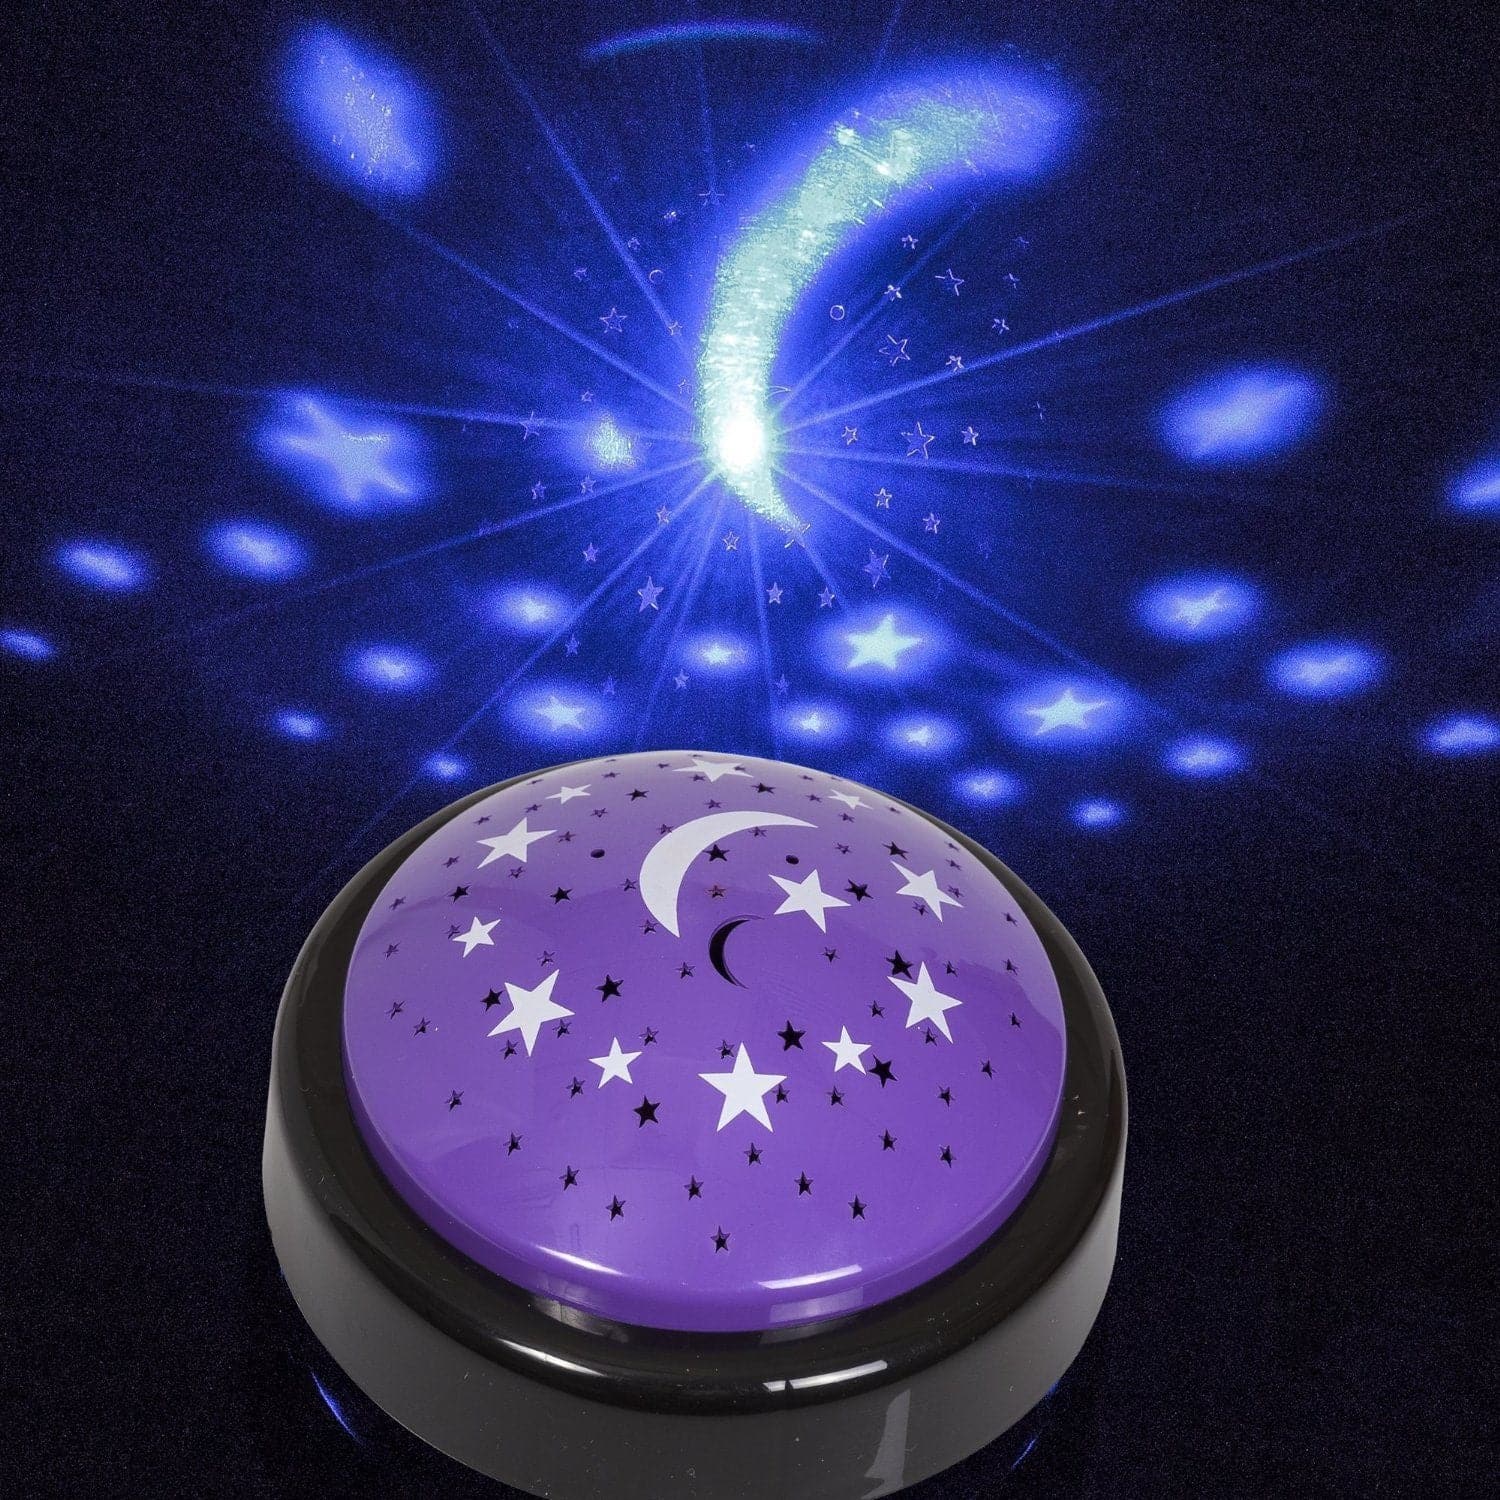 Star Light Projector Table Top, Illuminate your nights with the enchanting Star Light Projector Table Top! This charming device casts a sky full of stars and a radiant crescent moon on your ceiling, transforming any room into a serene celestial escape. 🌌 How It Works: The top of this projector is adorned with specially crafted holes positioned over a light source, allowing light to pierce through the gaps and project a constellation of stars and a moon above, creating an instant celestial ambiance. 🌟 Design